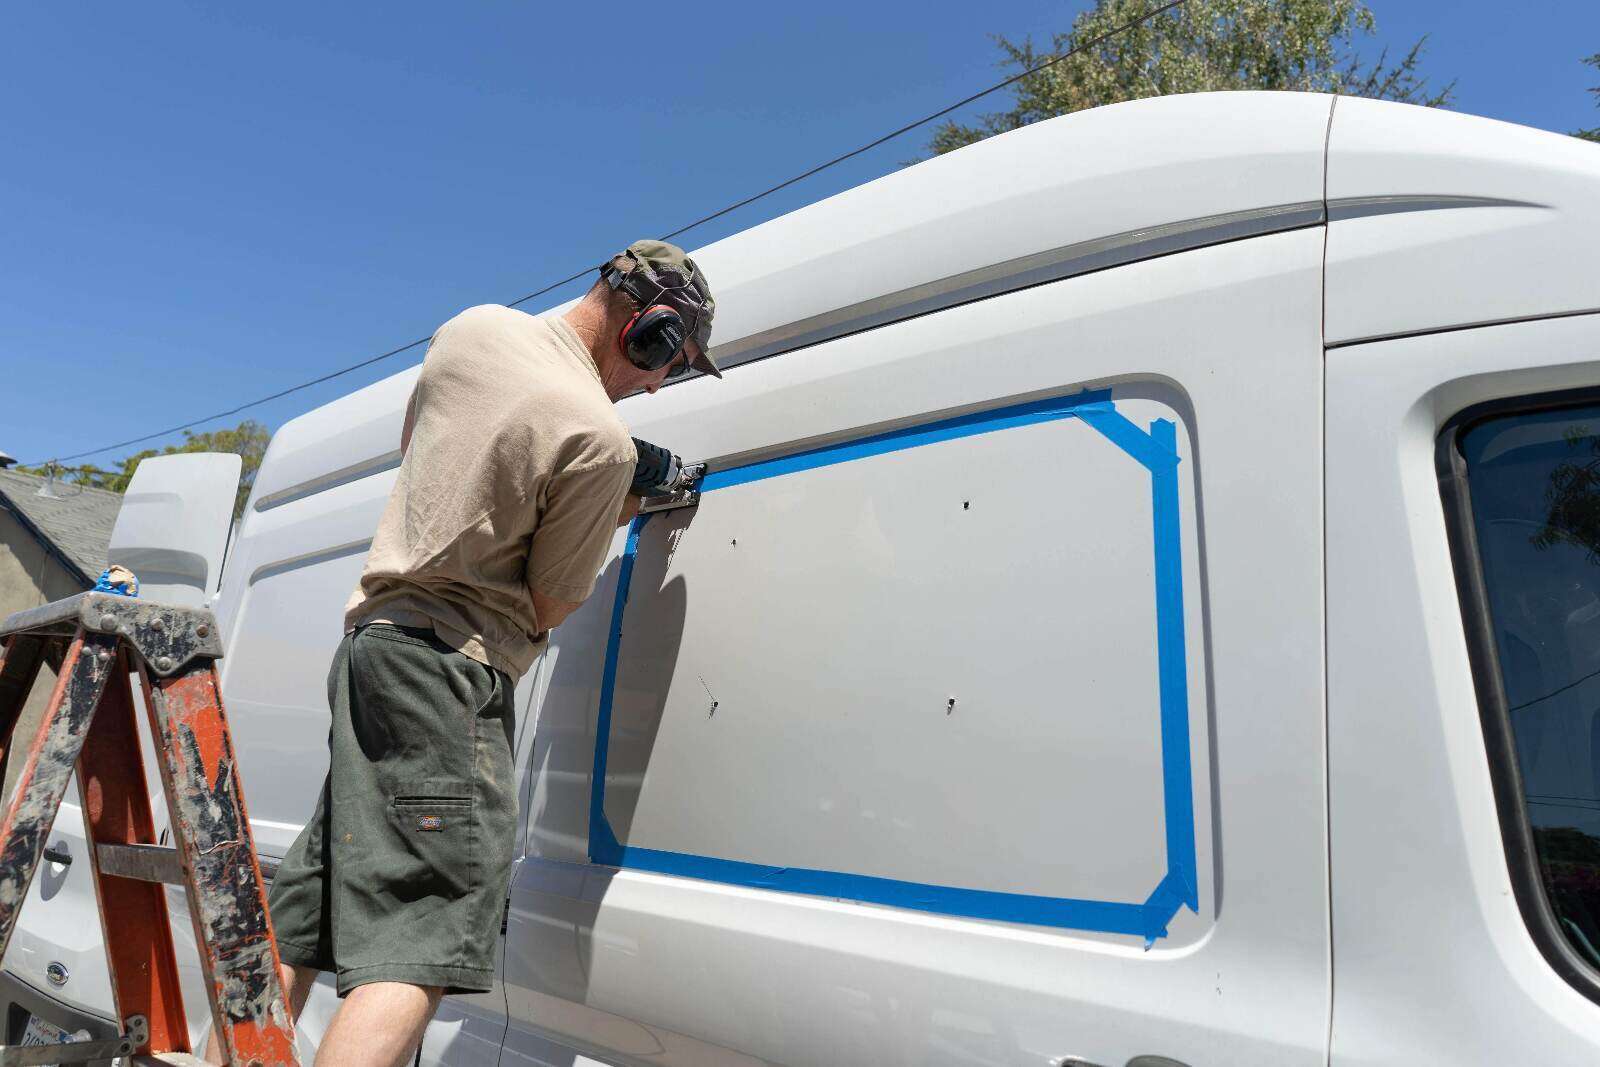 Installing CR Laurence windows on a camper van, using reciprocal saw